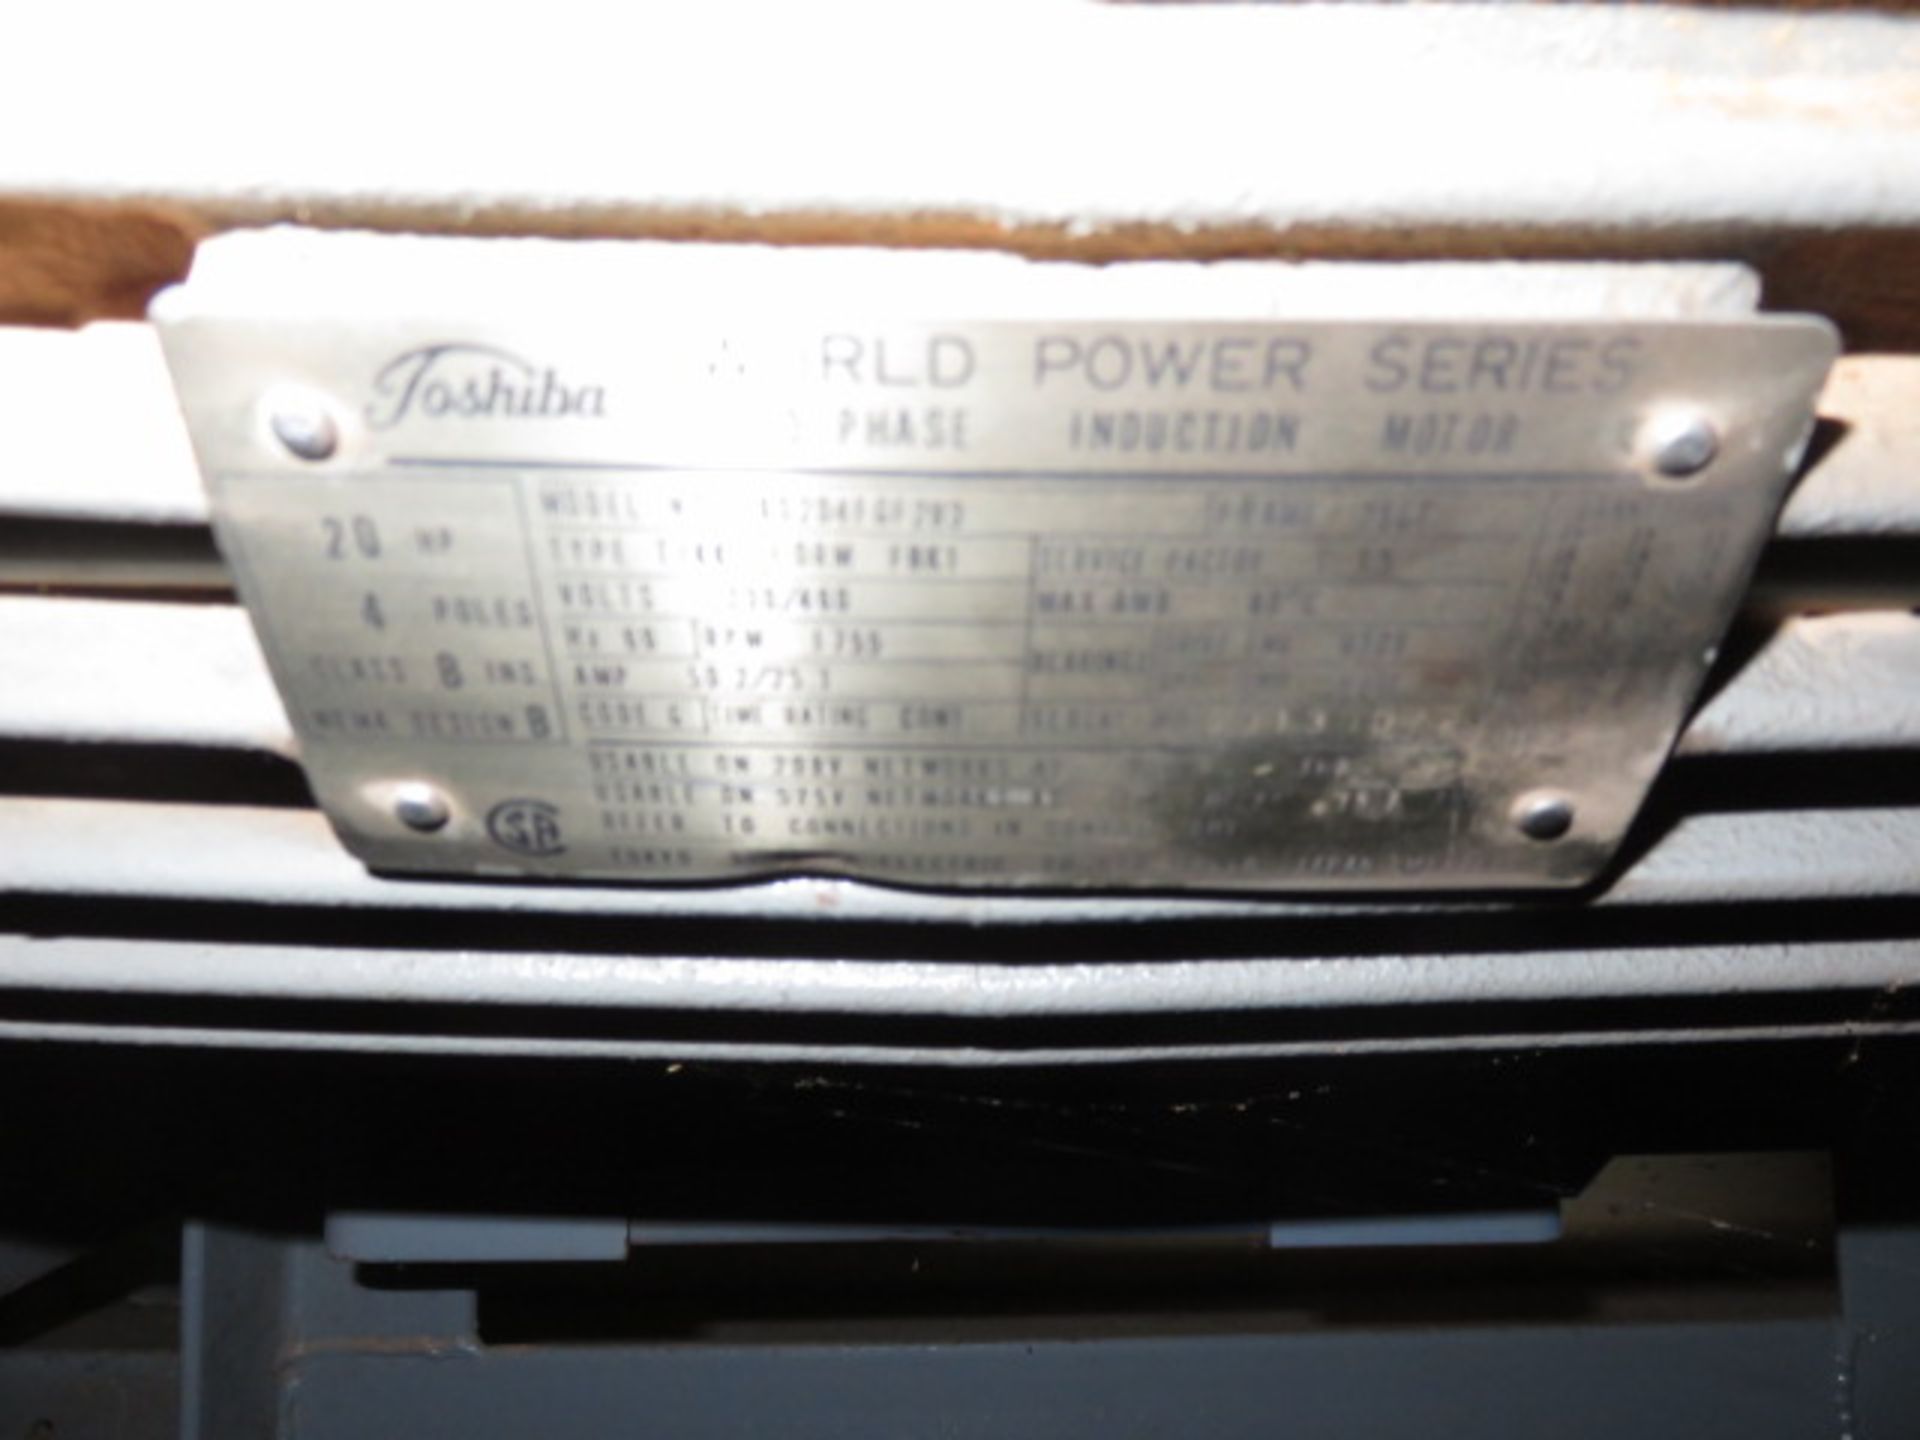 BARRY 619 WT HD BLOWER, 20 HP - Image 5 of 6